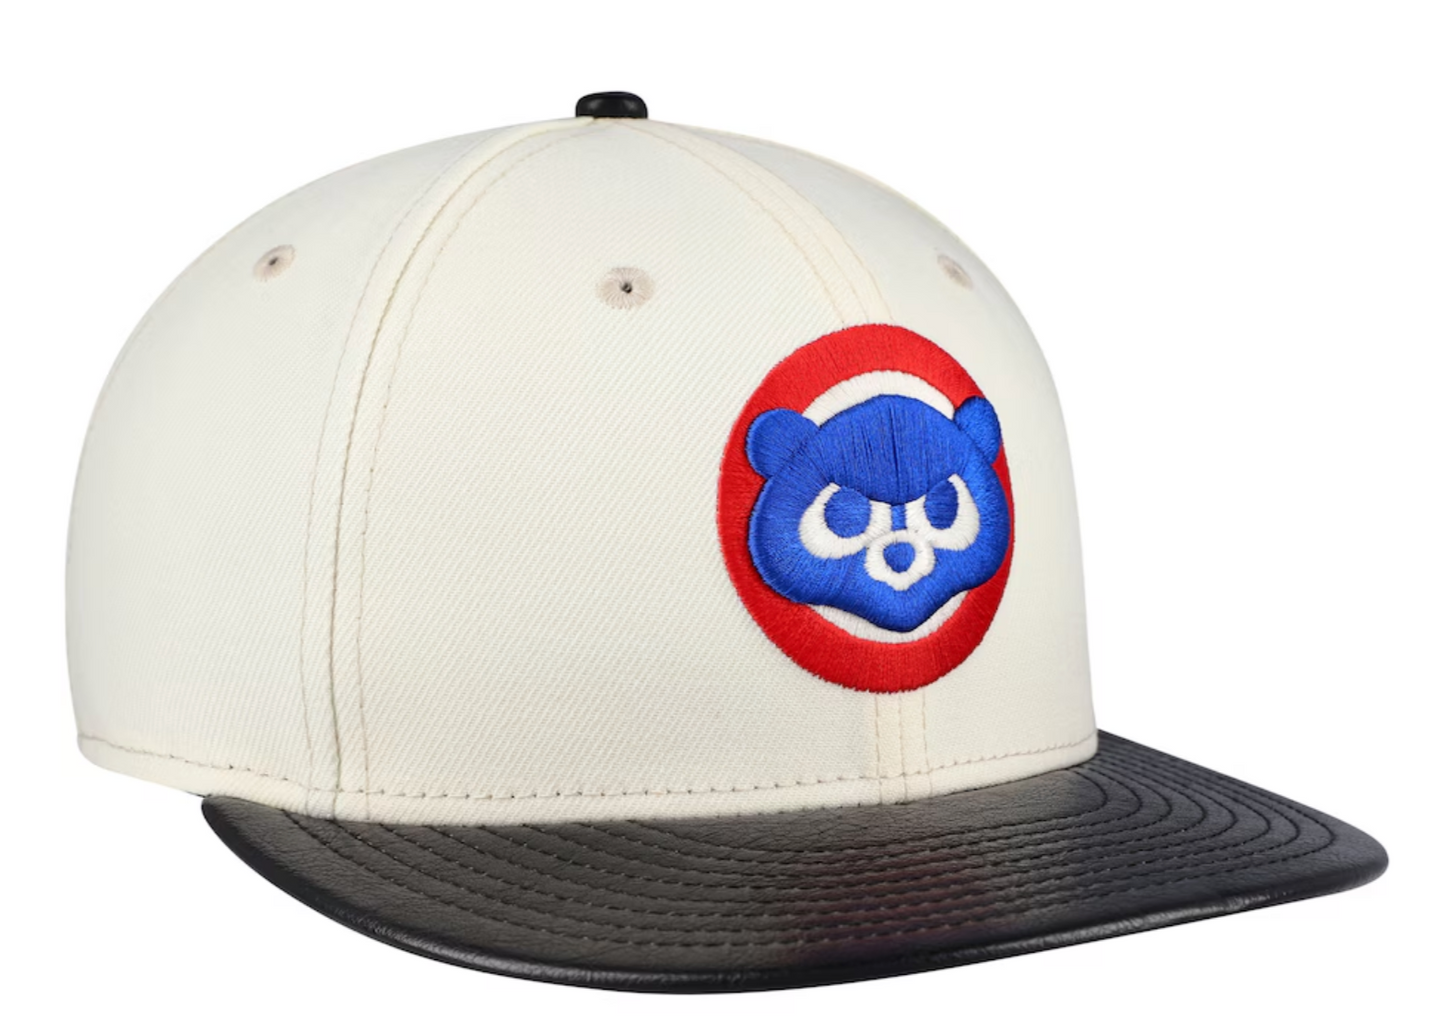 Chicago Cubs Cooperstown Collection Cream/Black Leather Visor New Era 59FIFTY Fitted Hat